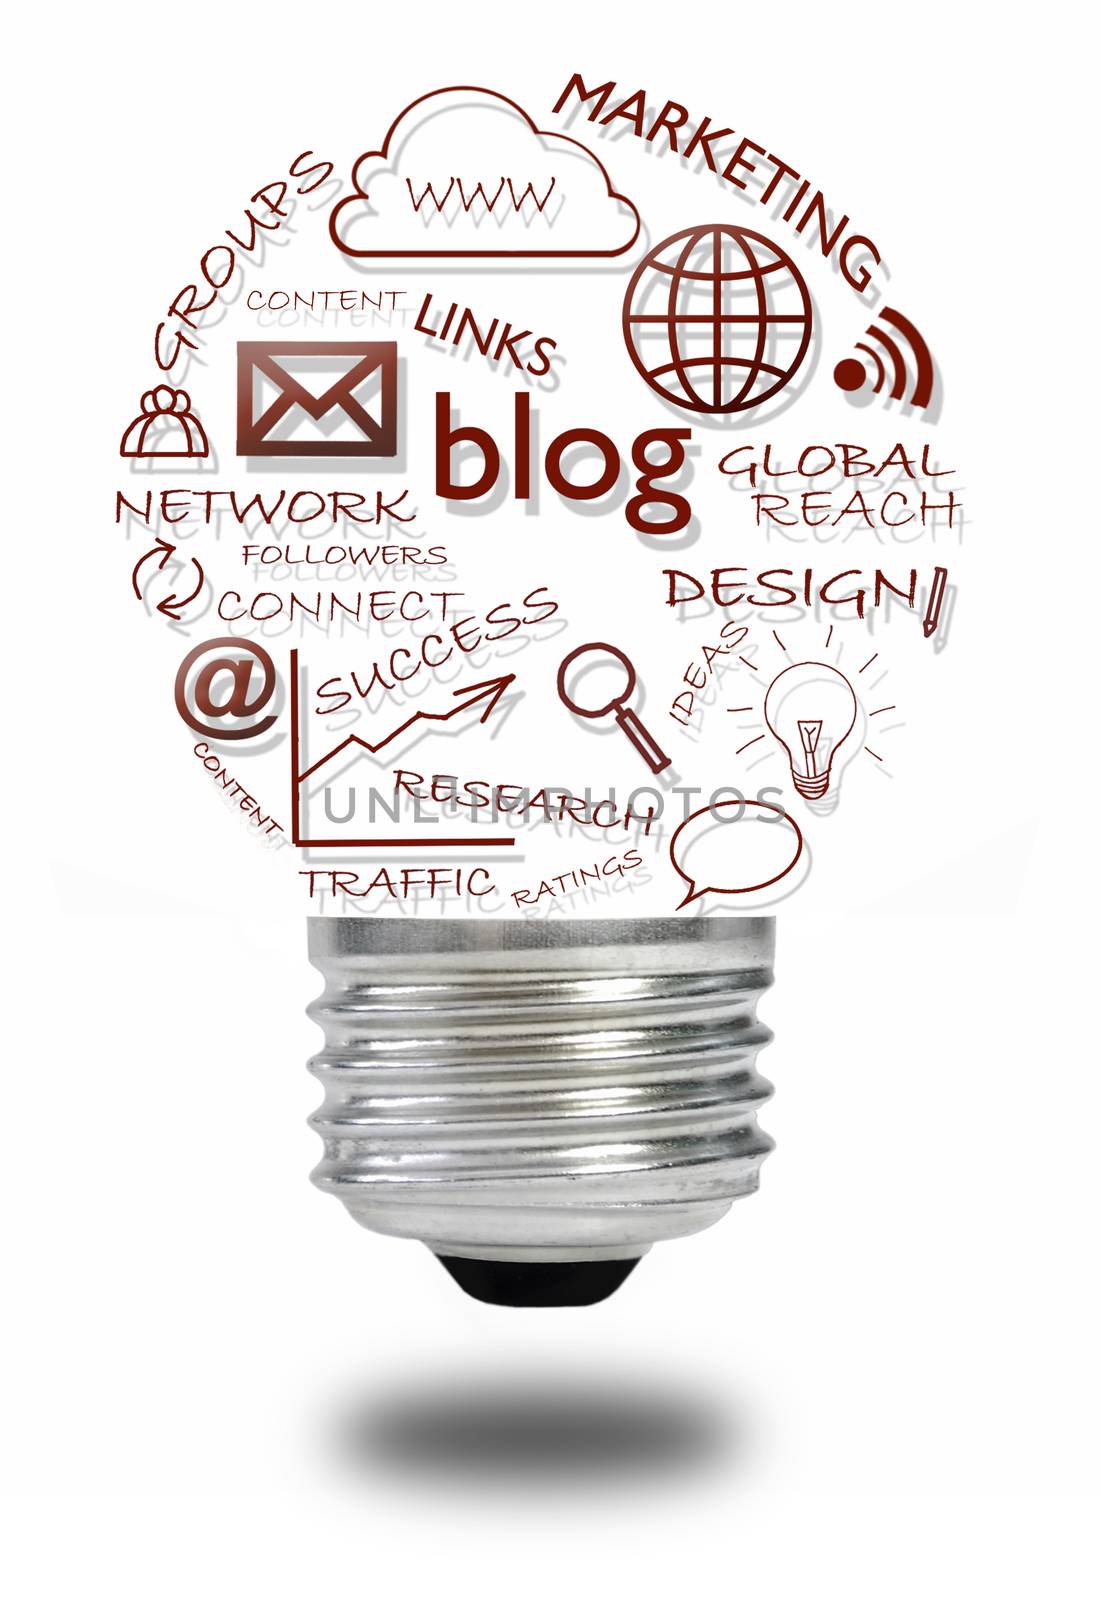 Blog and social media icons light bulb over a white background